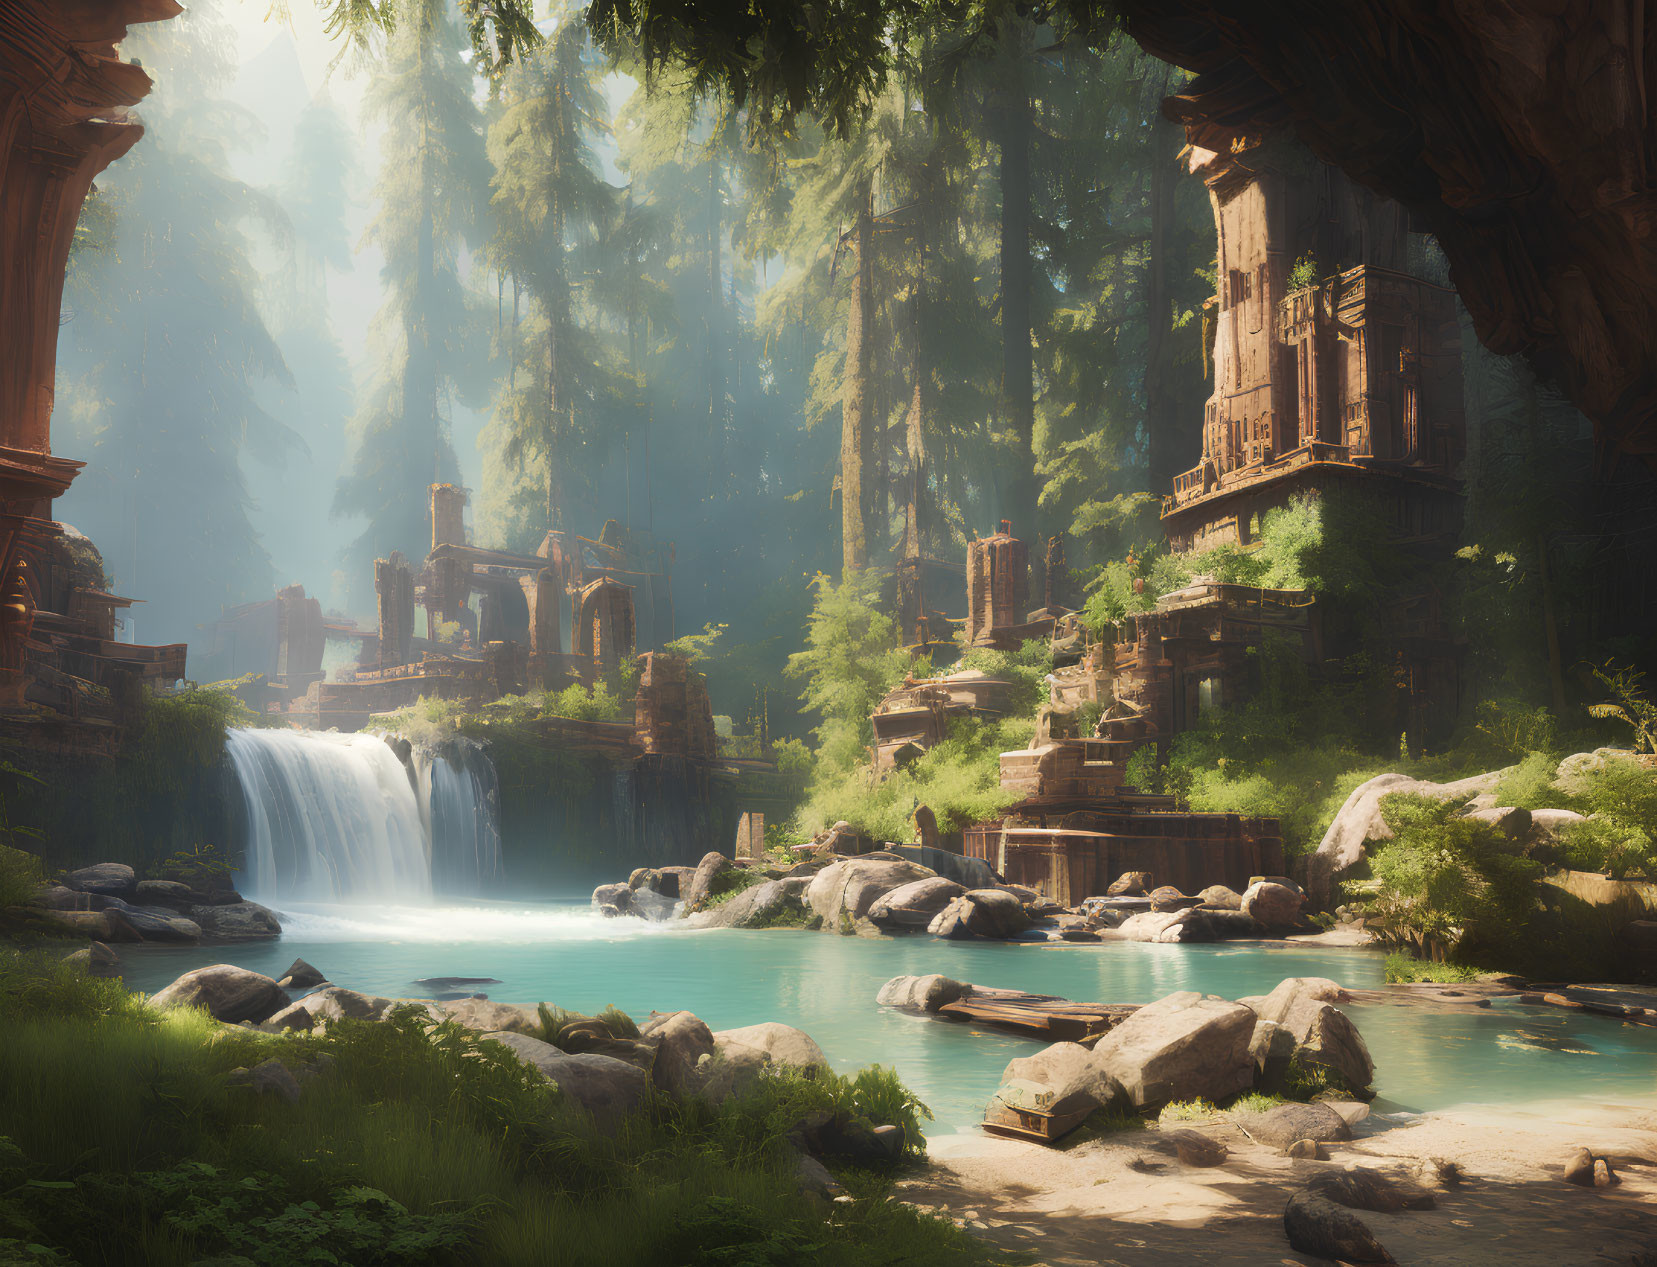 Ethereal landscape with ancient ruins, lush forest, waterfall, and serene pond